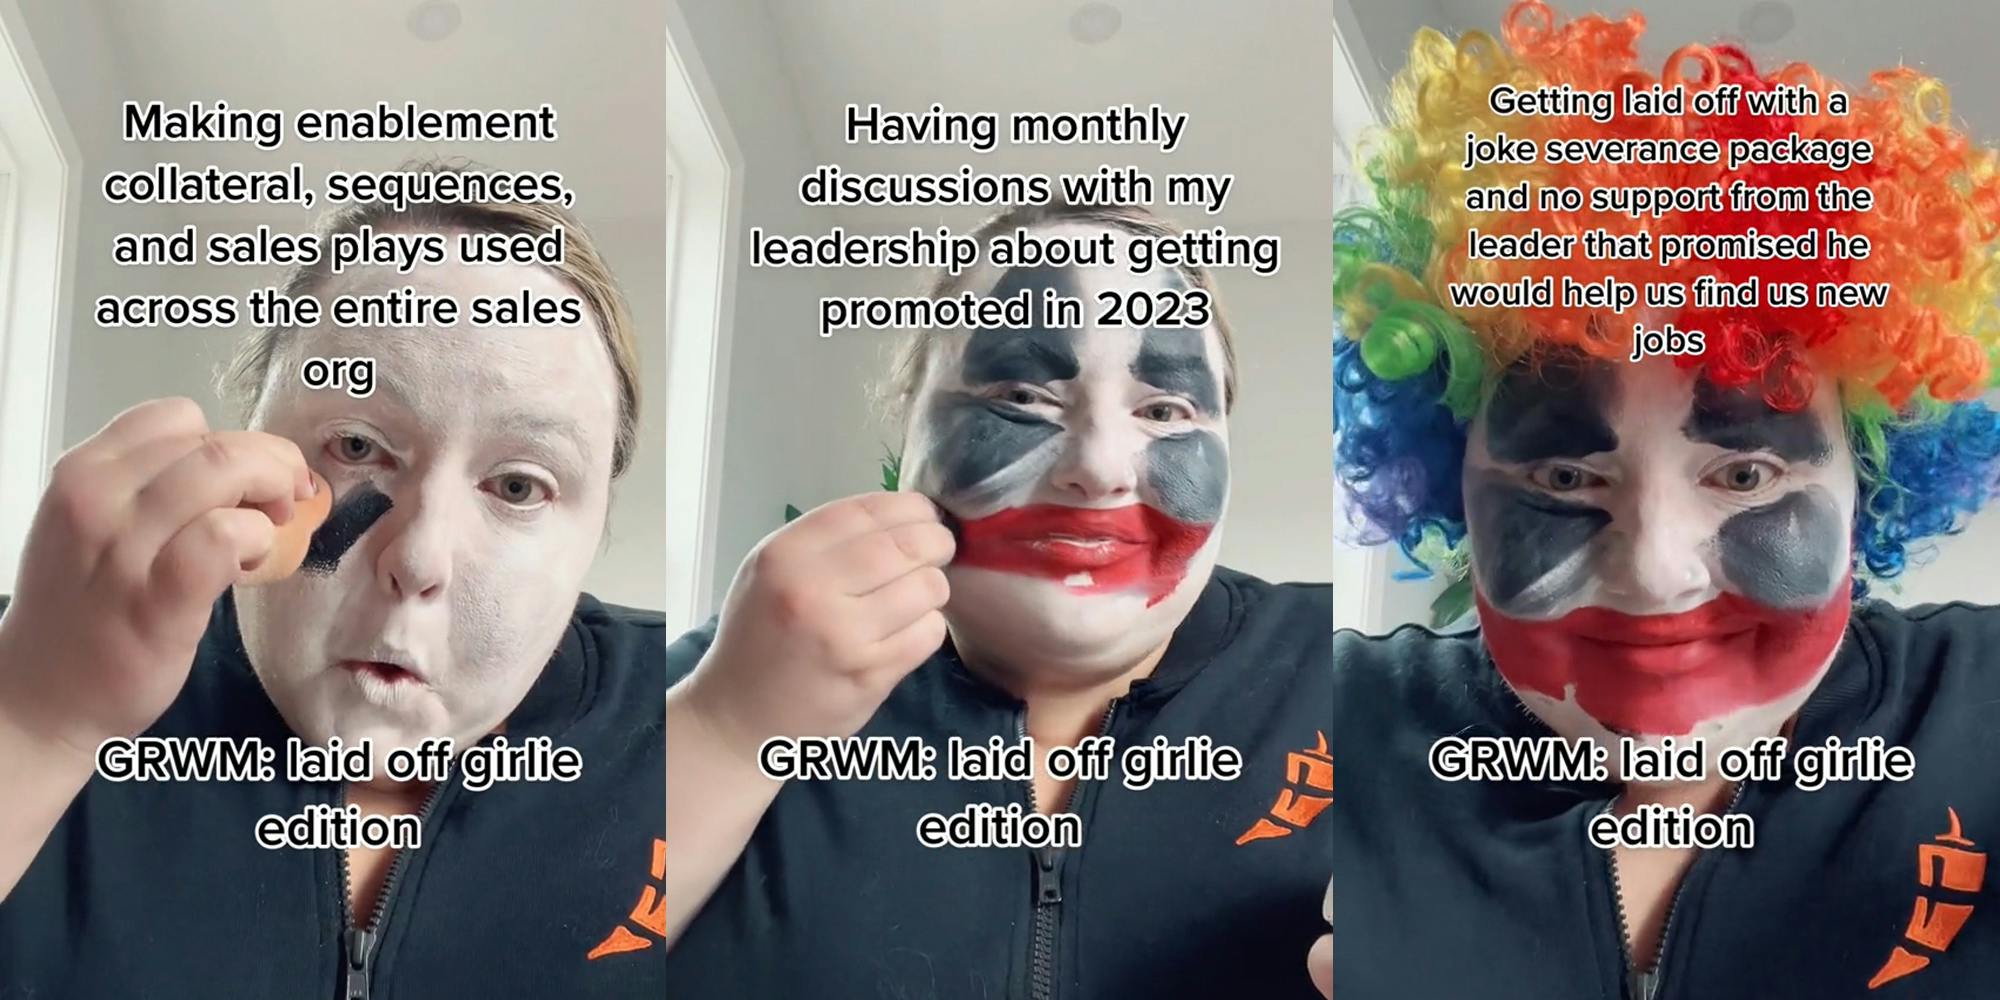 person applying clown makeup with caption "GRWM: laid off girlie edition" "Making enablement collateral, sequences, and sales plays used across the entire sales org" (l) person applying clown makeup with caption "GRWM: laid off girlie edition" "Having monthly discussions with my leadership about getting promoted in 2023" (c) person applying clown makeup with caption "GRWM: laid off girlie edition" "Getting laid off with a joke severance package and no support from the leader that promised he would help us find new jobs" (r)